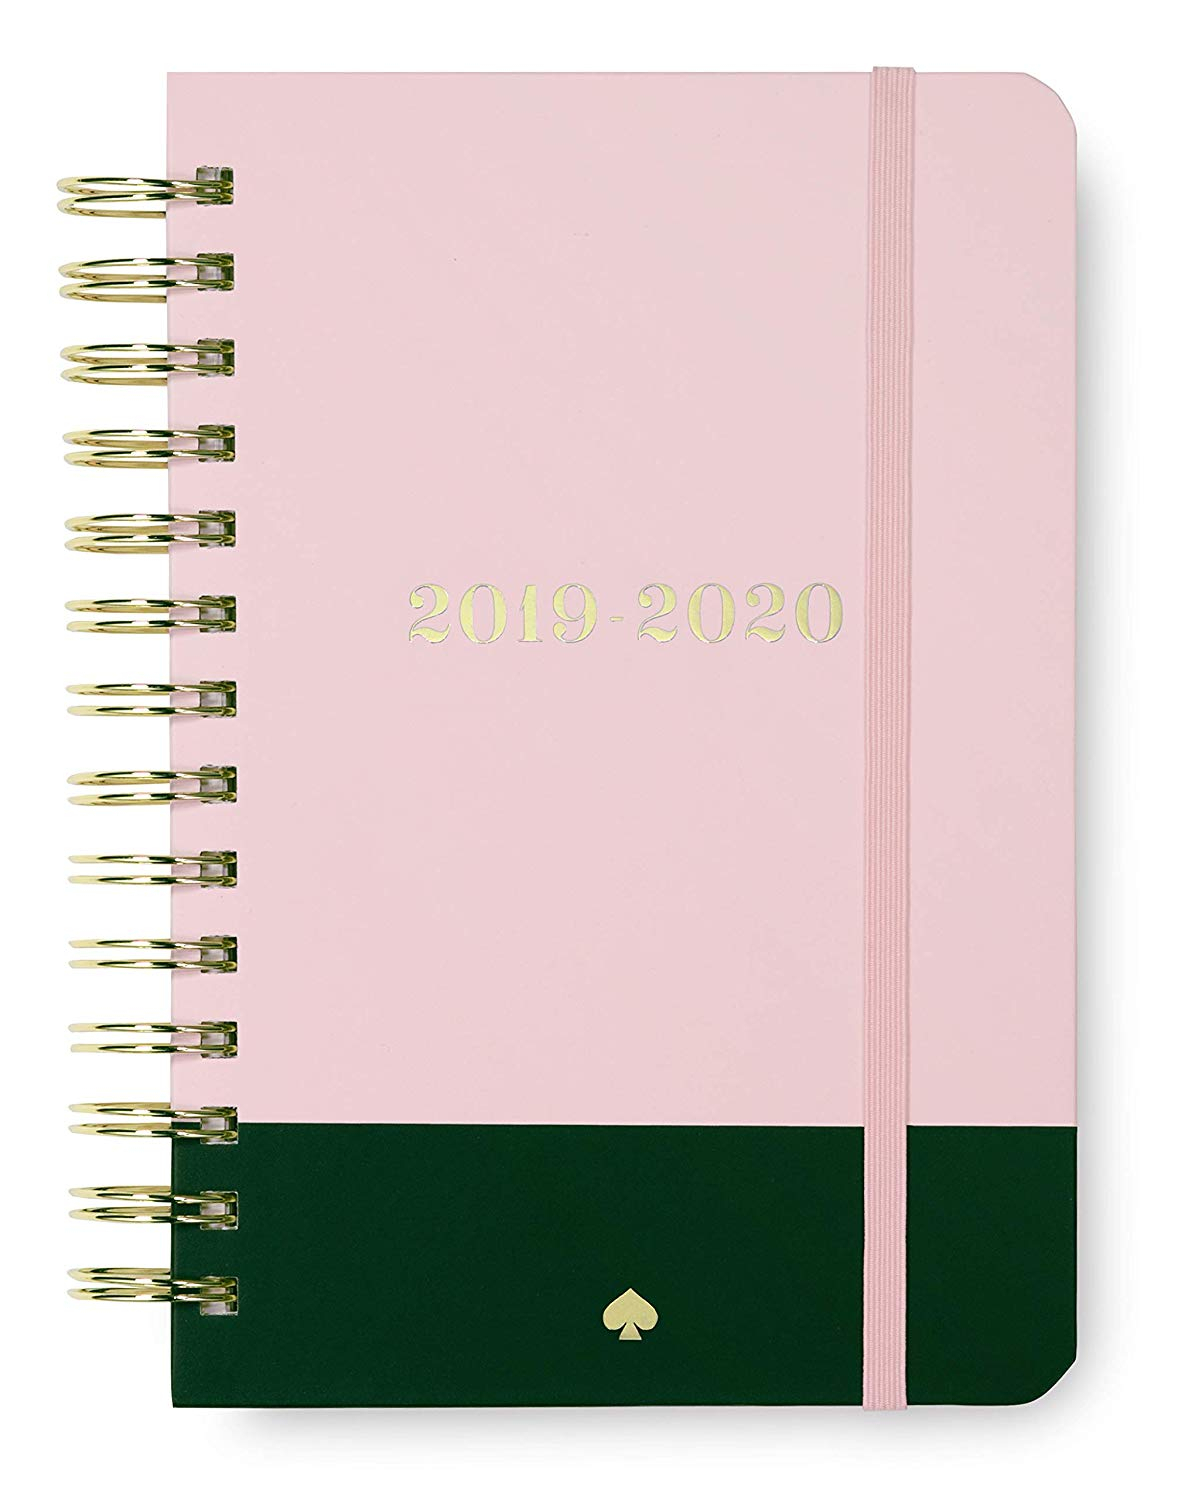 50+ Best Planners For 2020